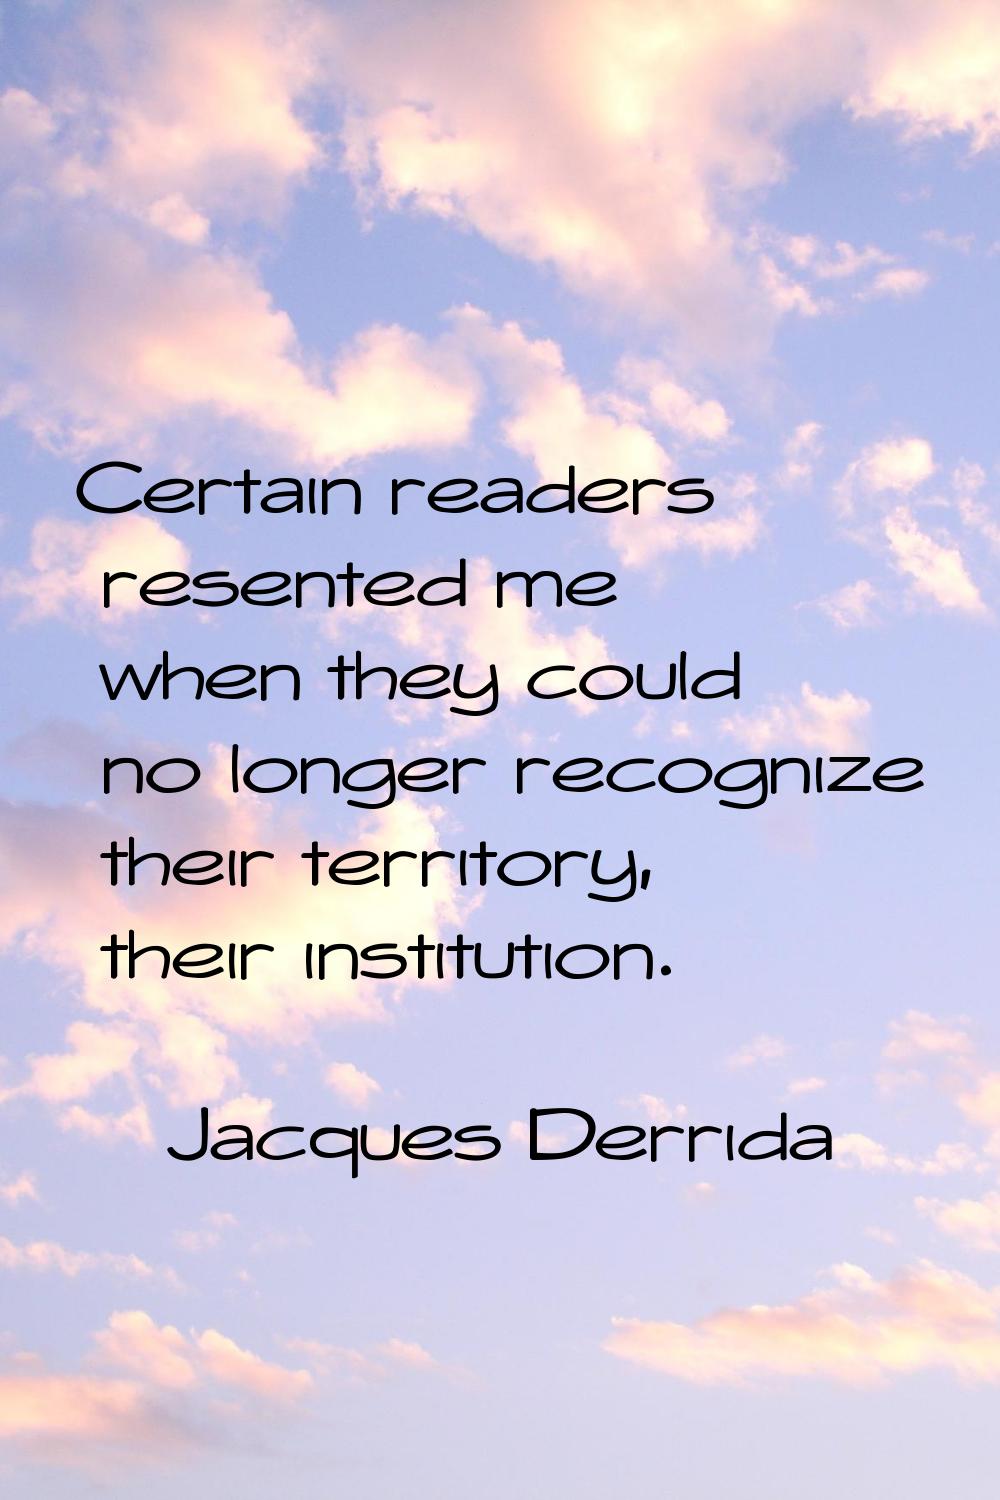 Certain readers resented me when they could no longer recognize their territory, their institution.